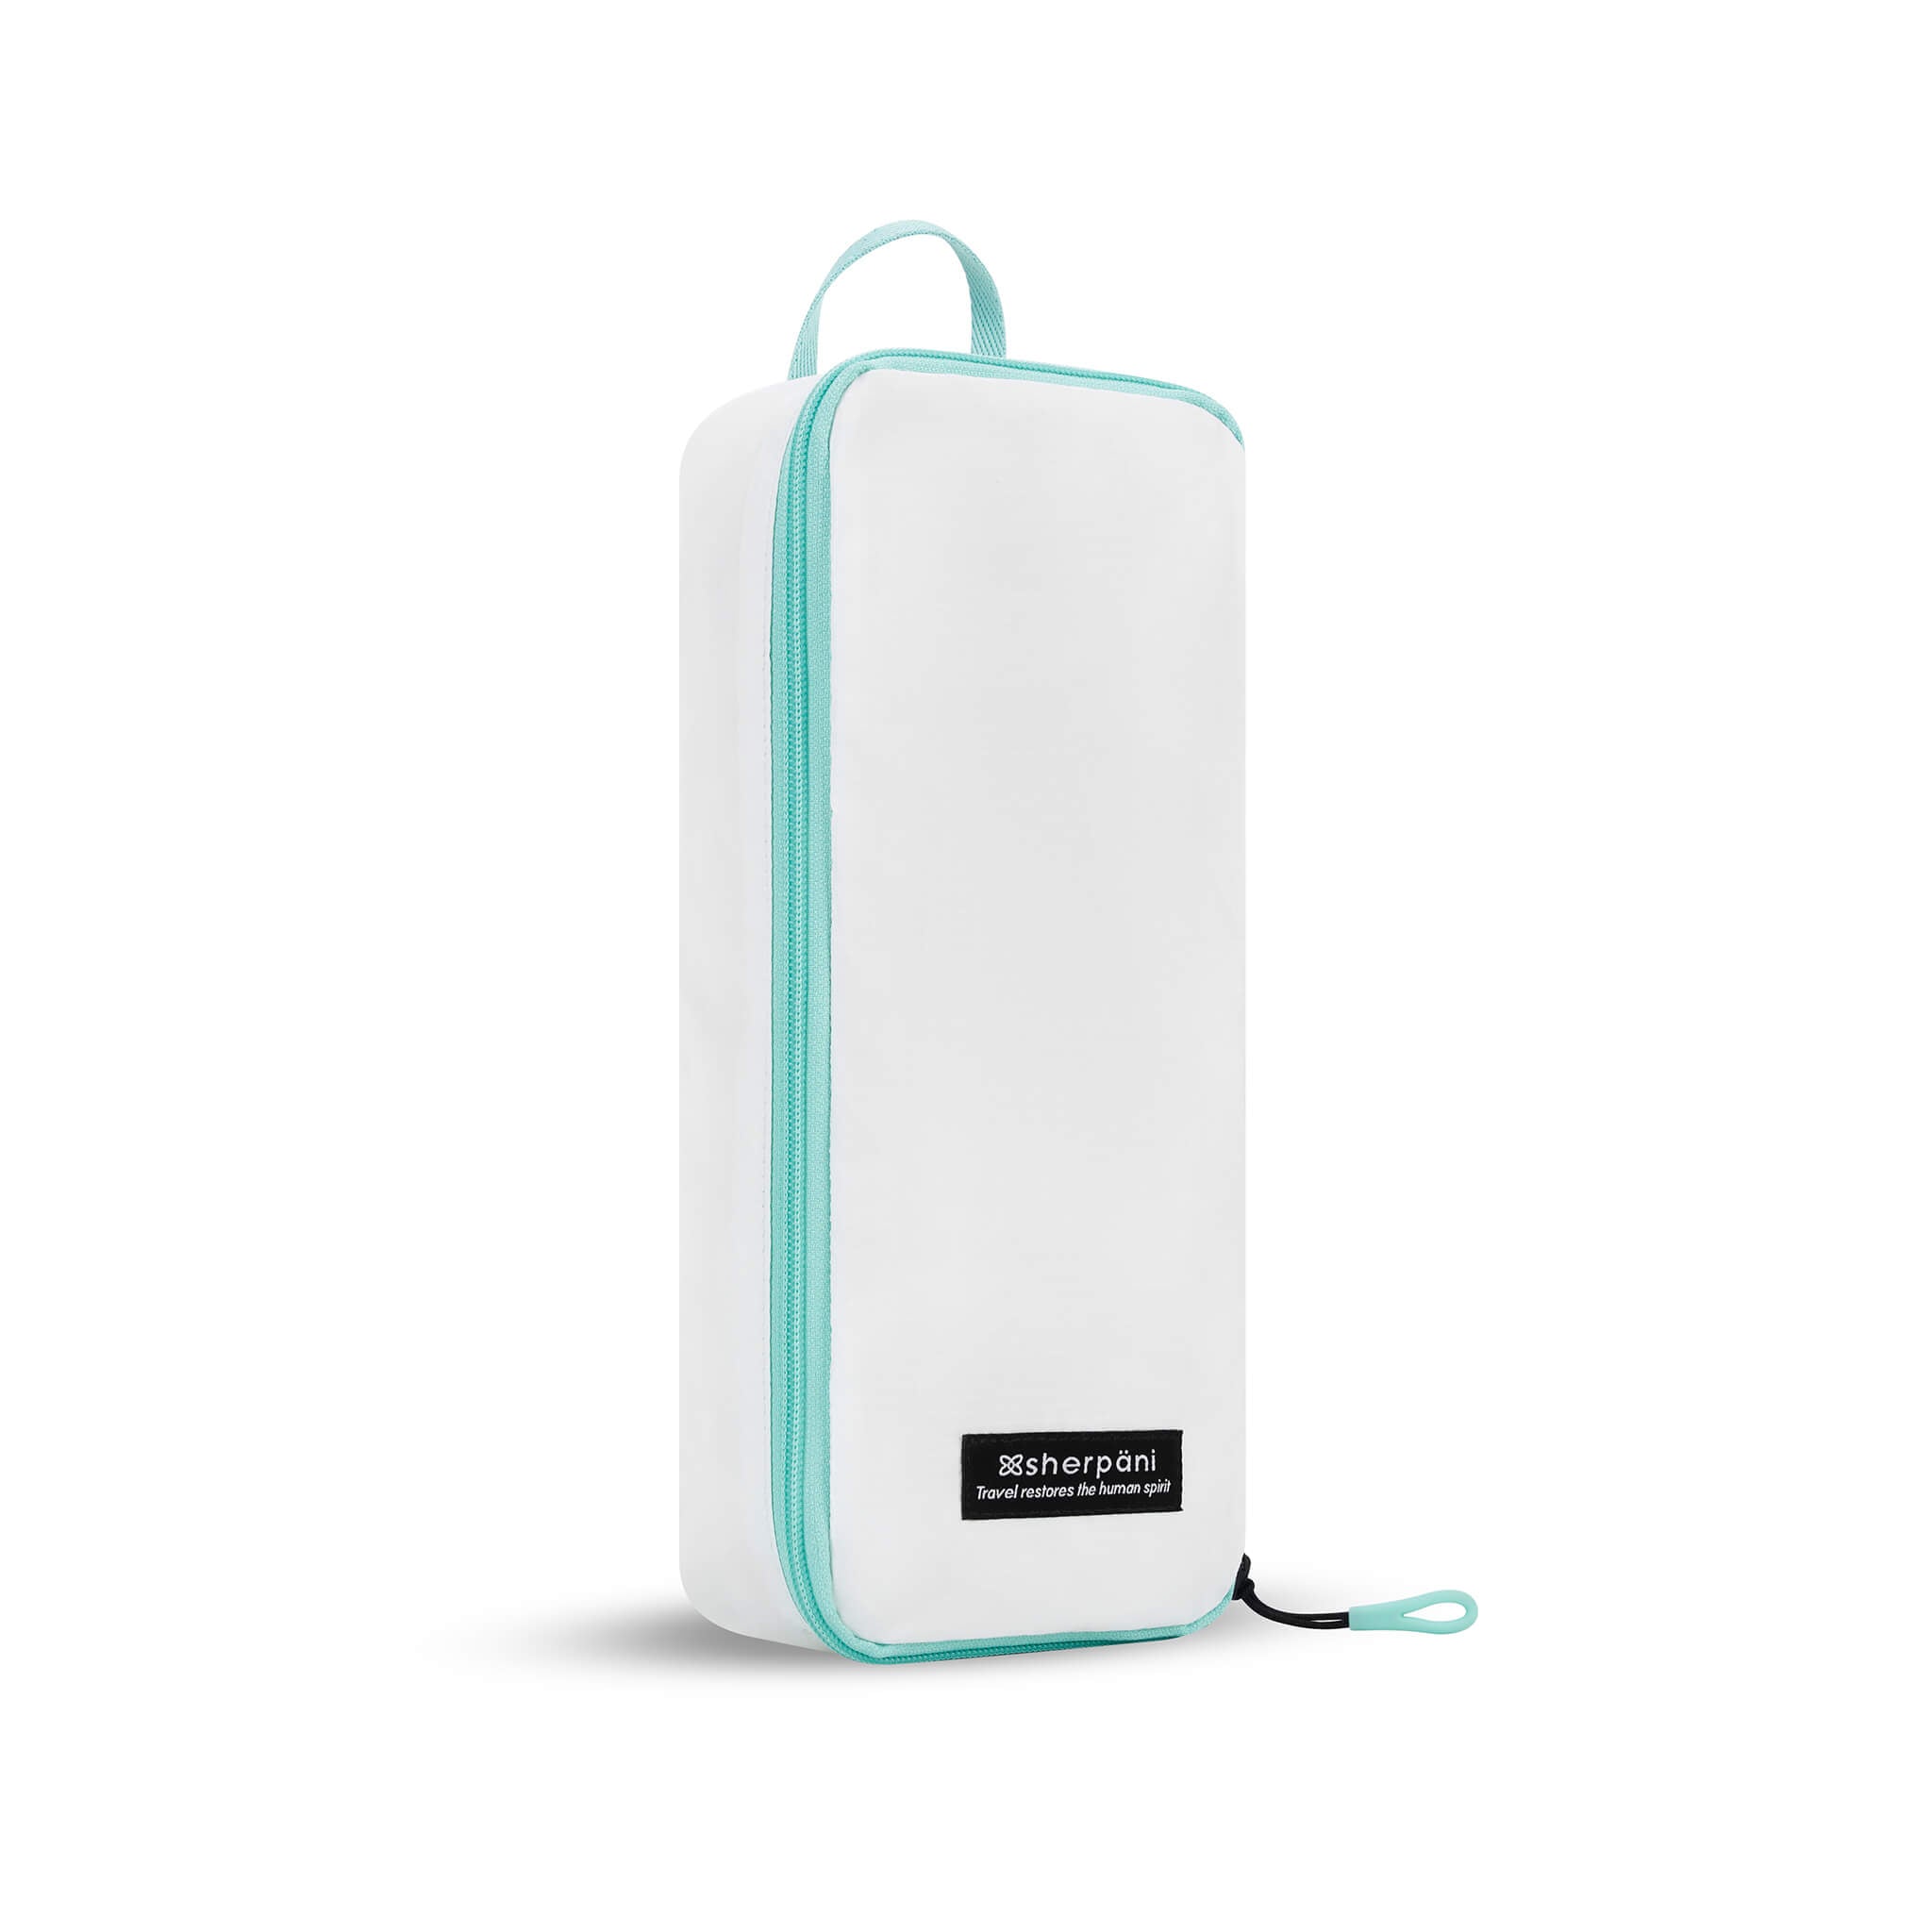 Angled front view of Compass Packing Cube in small size. The cube is white with zipper and handle accented in aqua.